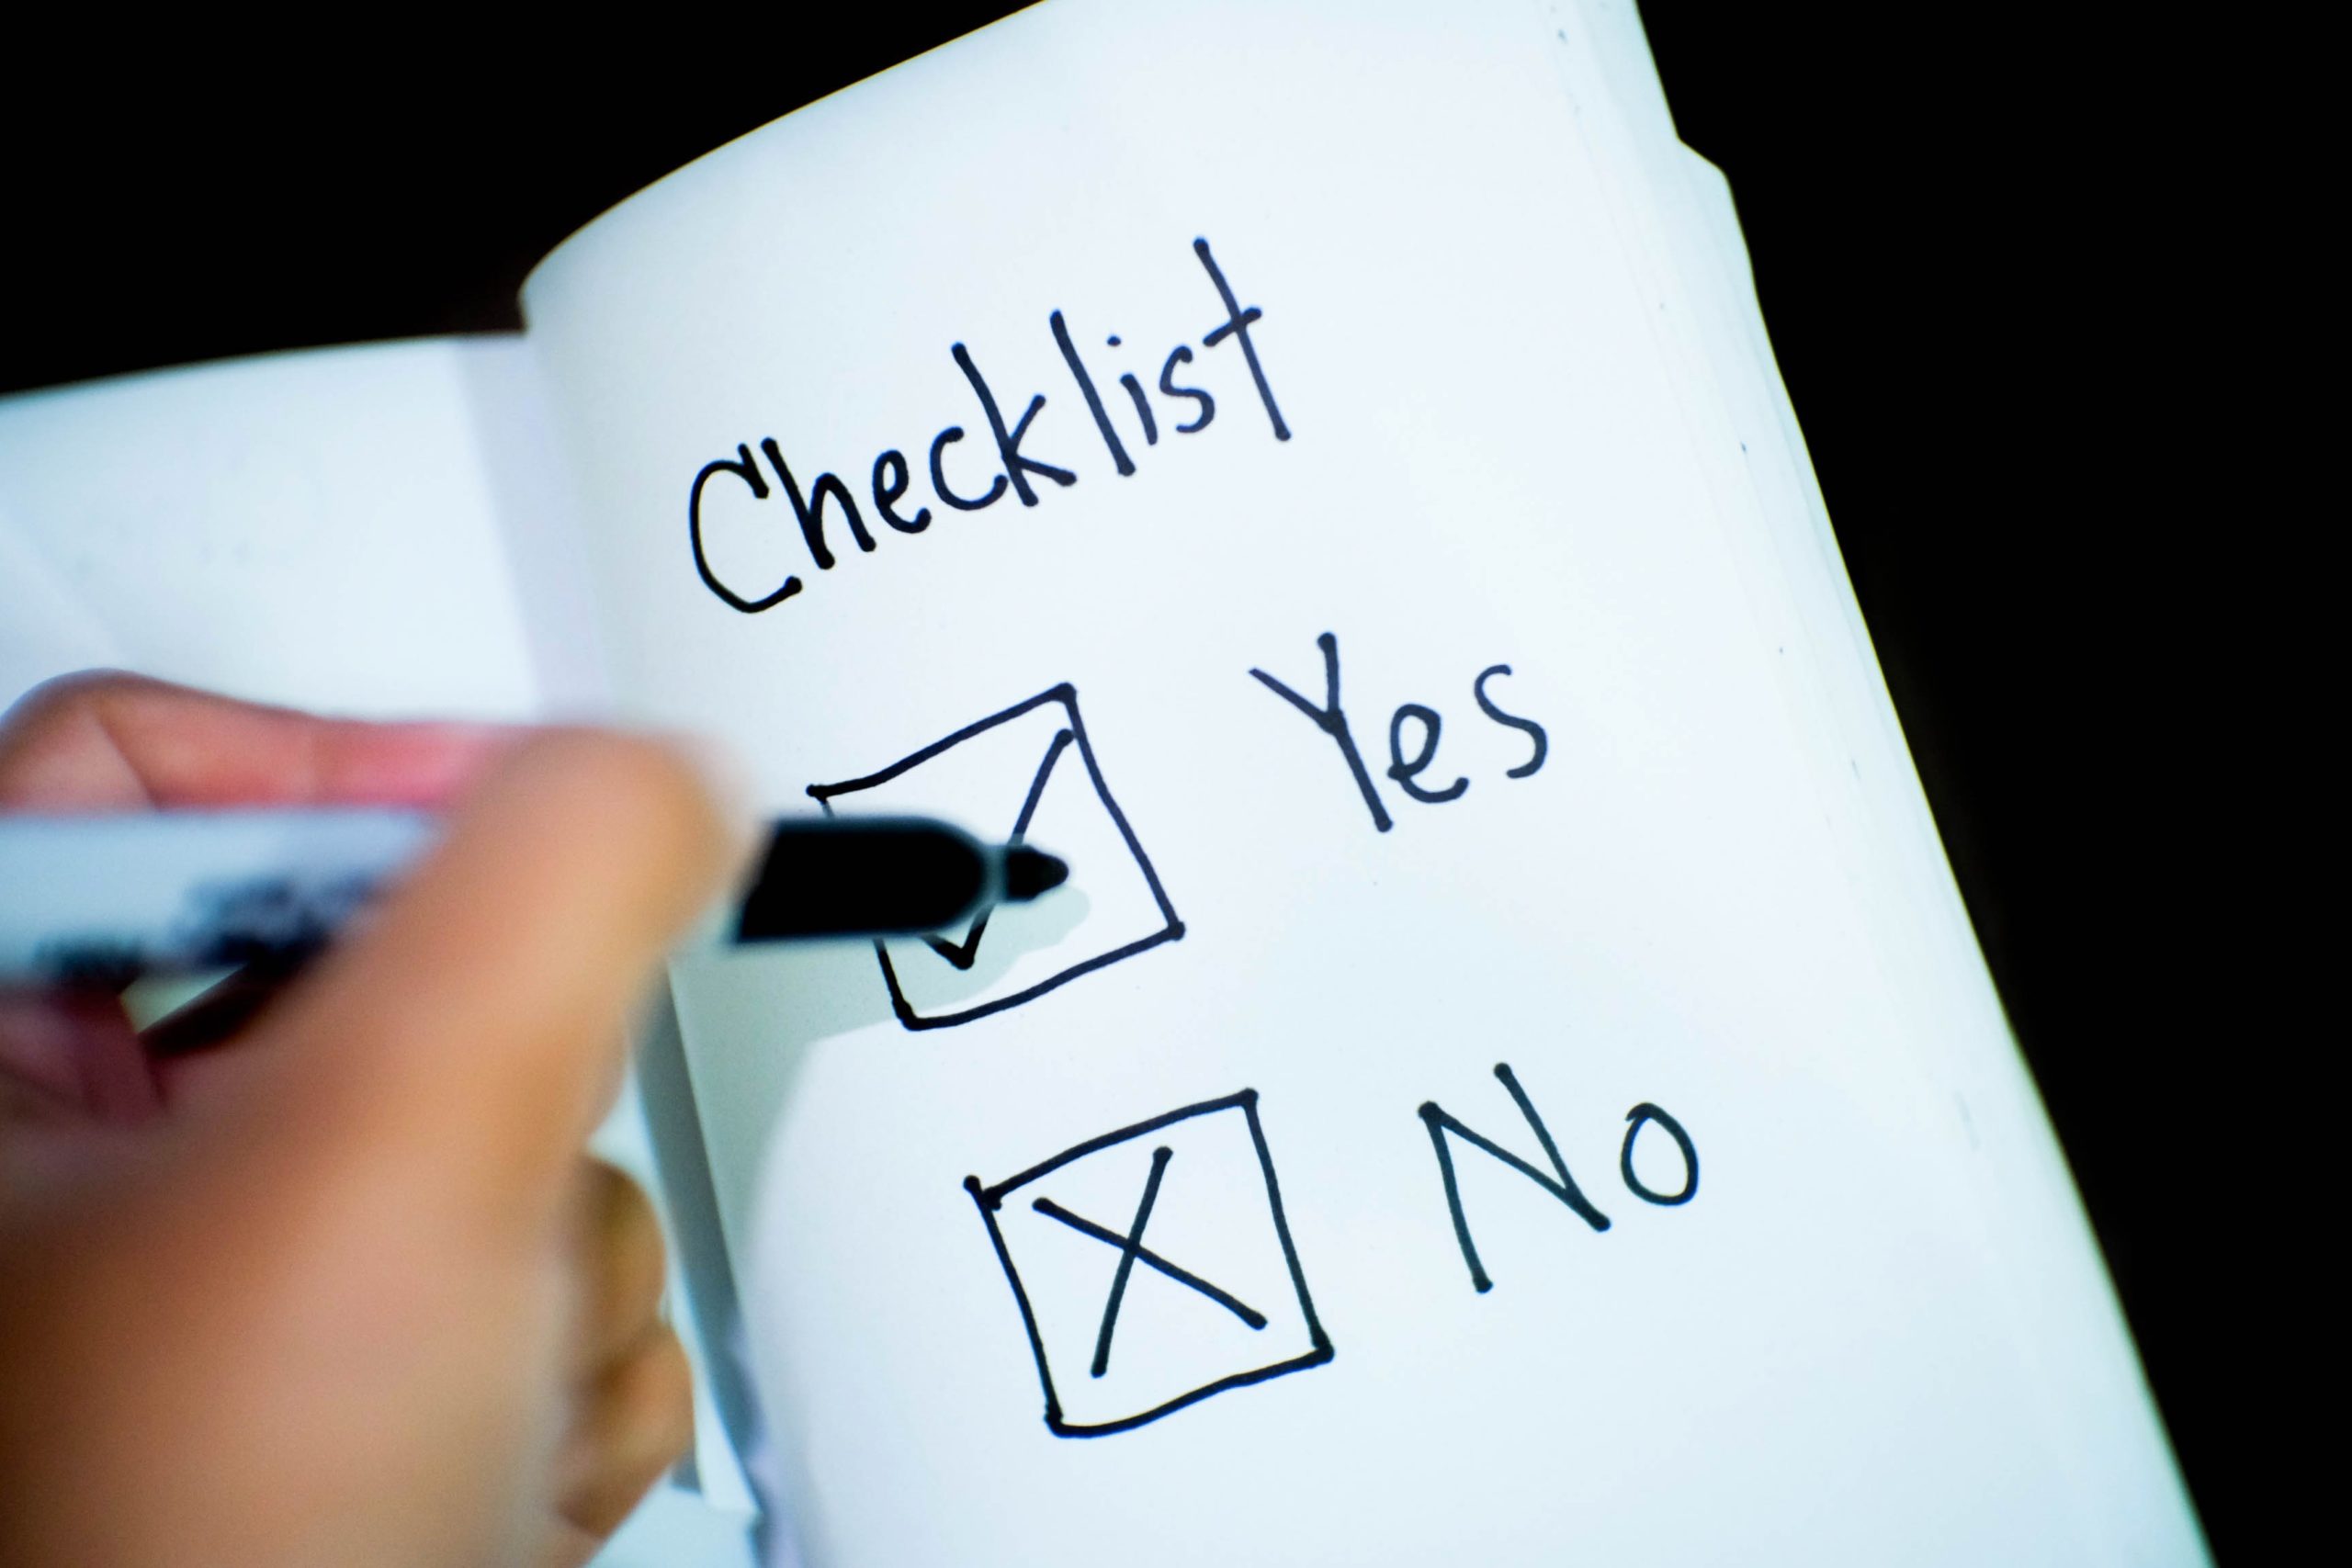 An open book with a checklist on one page. There is a tick next to Yes and a cross next to No. A hand holding a pen is on the tick.